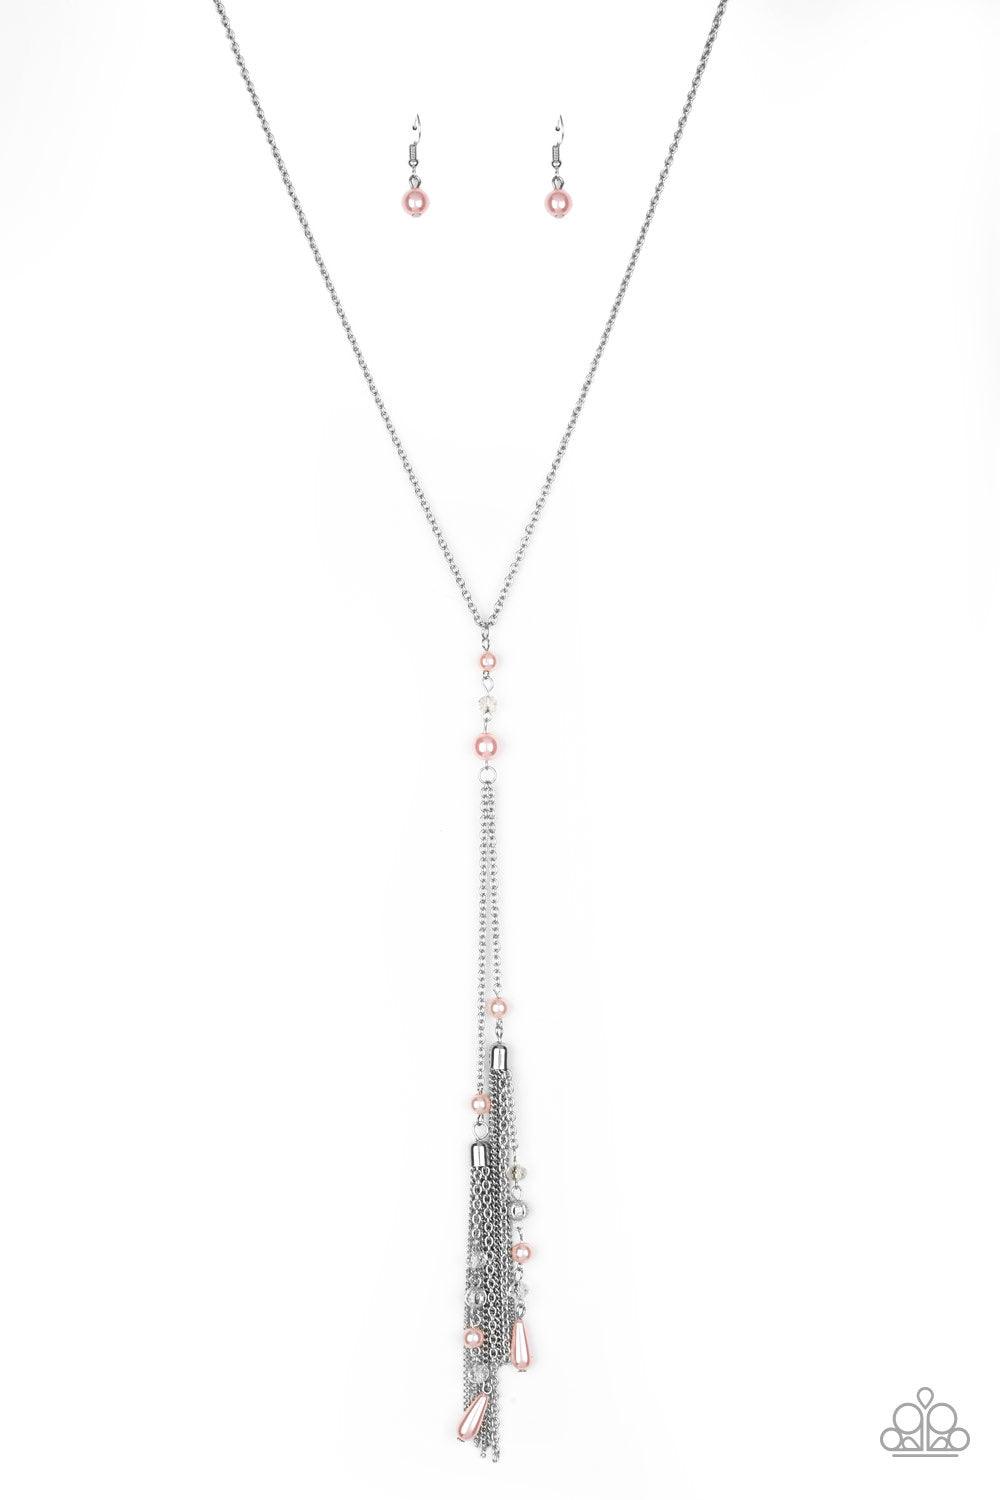 Paparazzi Accessories Timeless Tassels - Pink Dainty pink pearls and sparkling white crystal-like bead gives way to two shimmery silver chain tassels. Infused with ornate silver beads, strands of matching beads trickle down the tassels for a refined flair